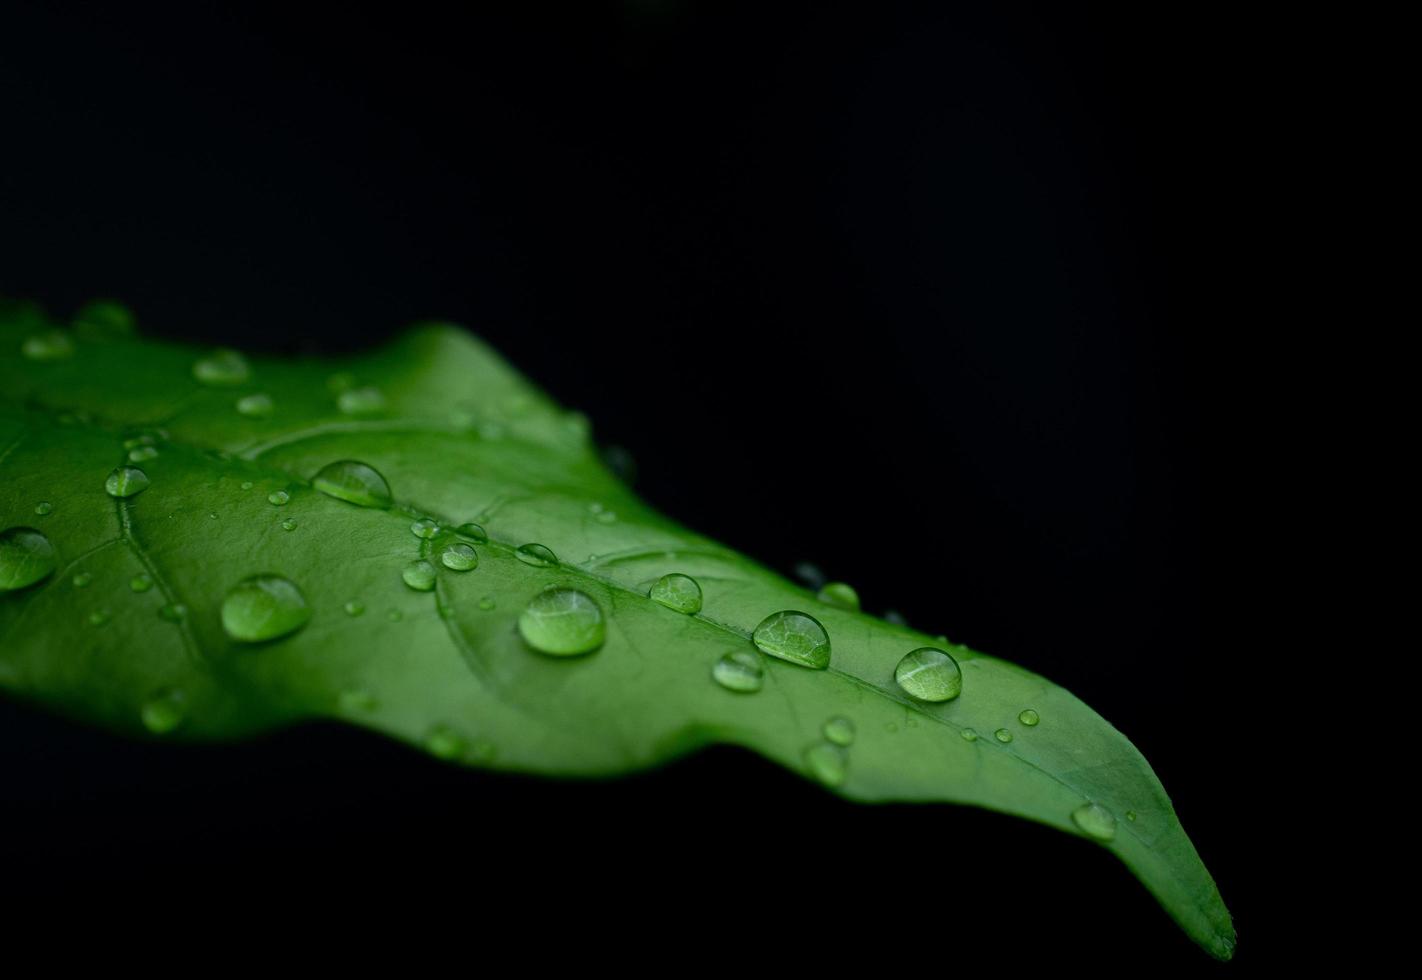 raindrops on fresh green leaves on a black background. Macro shot of water droplets on leaves photo